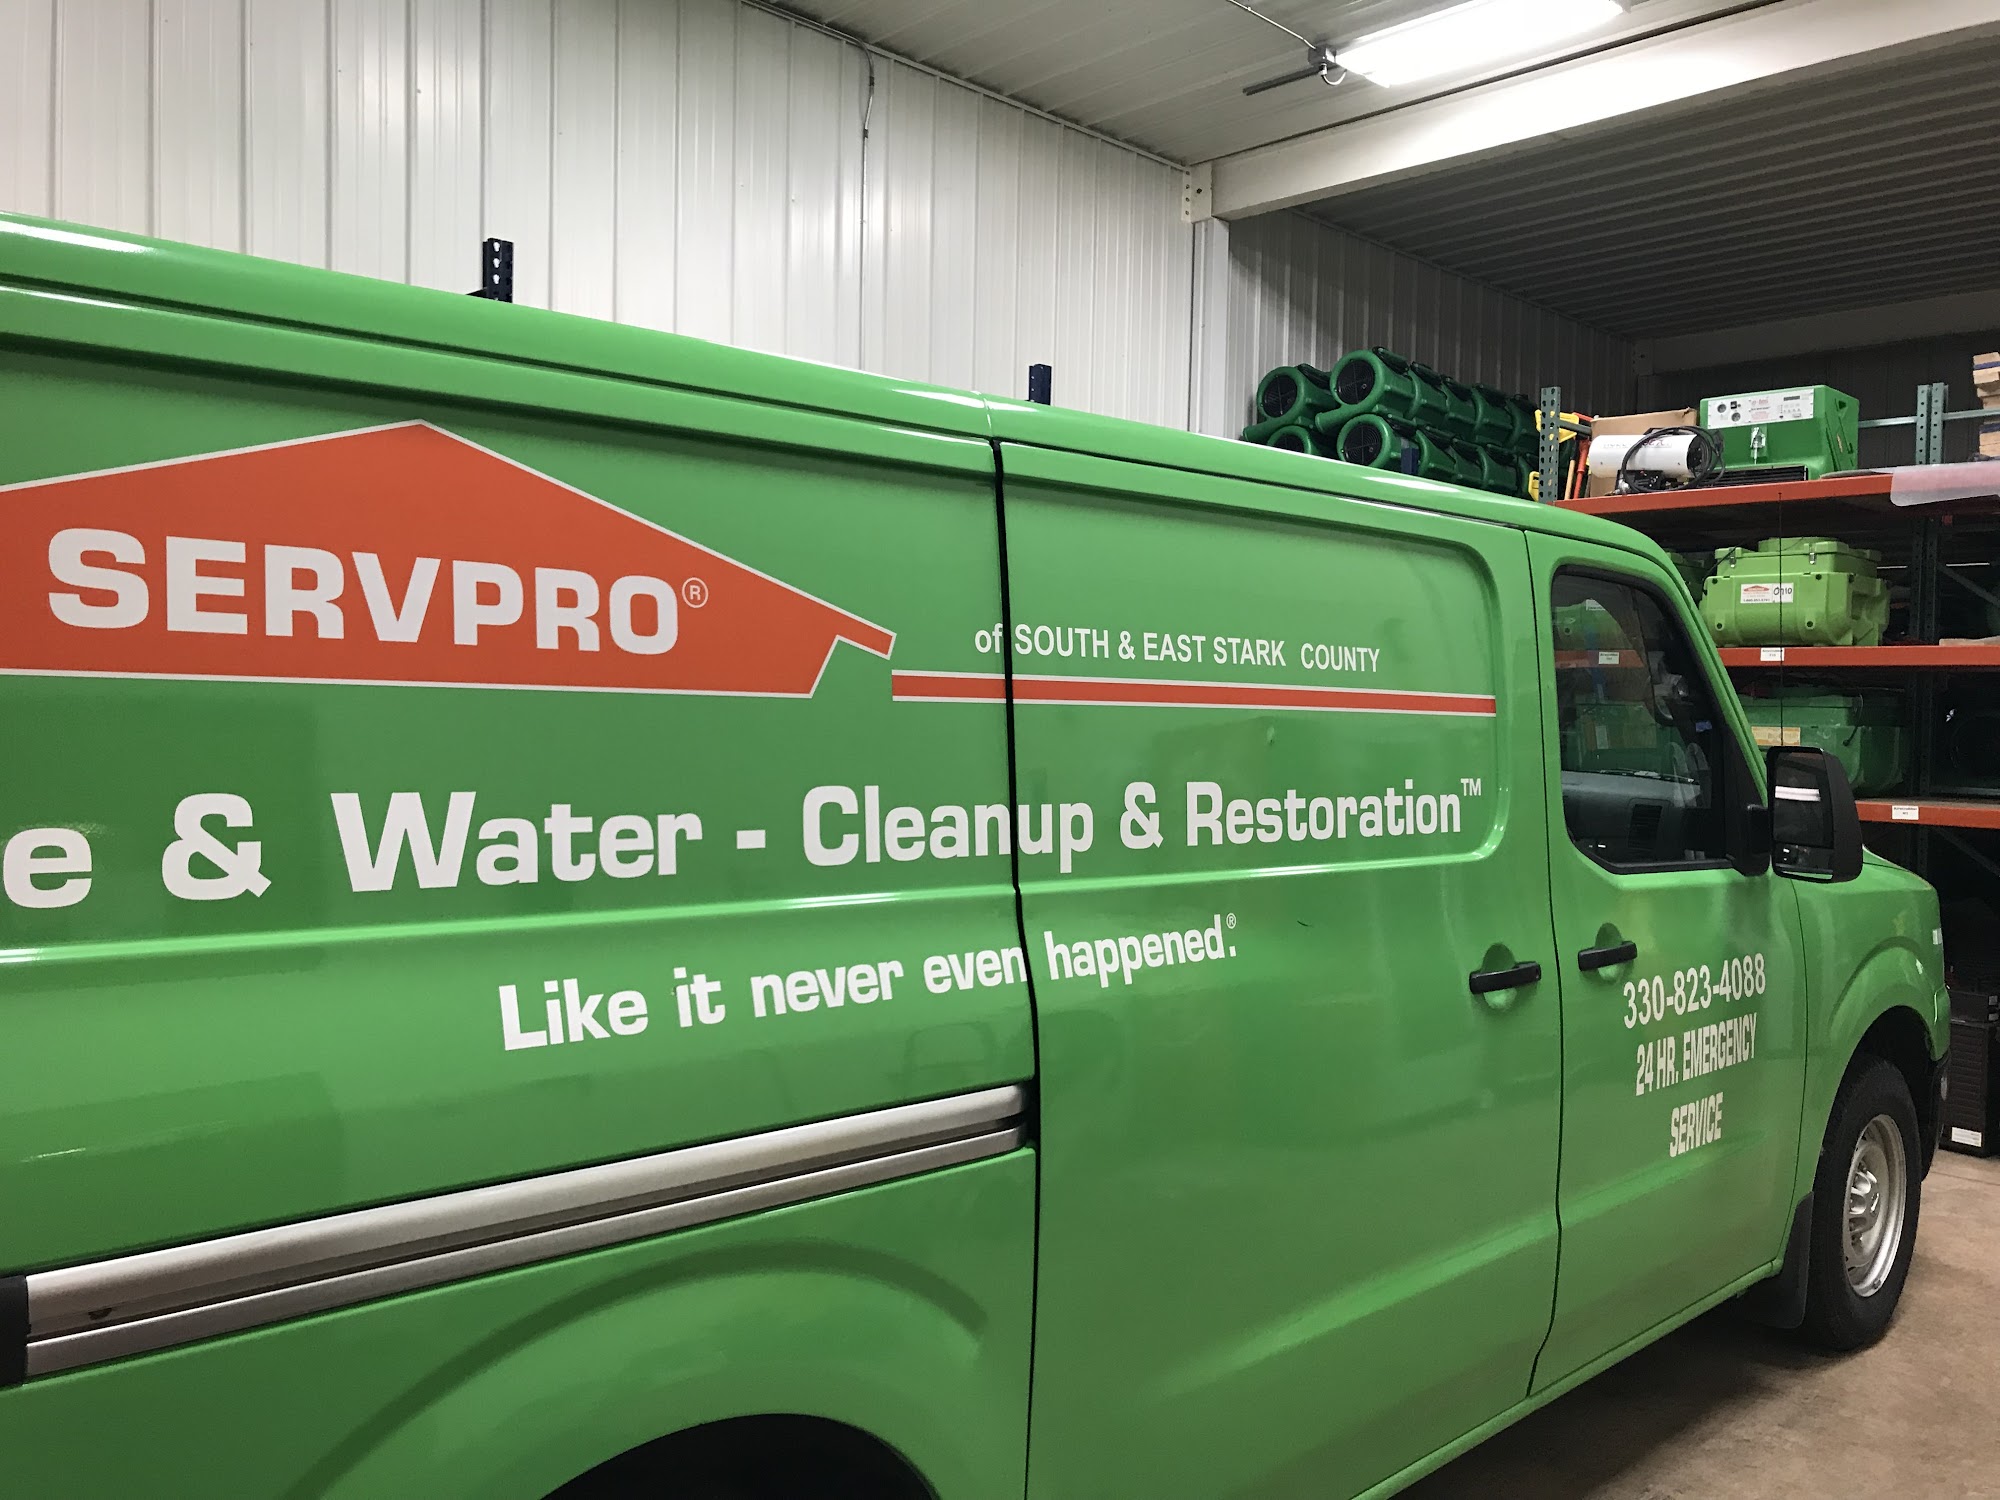 SERVPRO of South & East Stark County